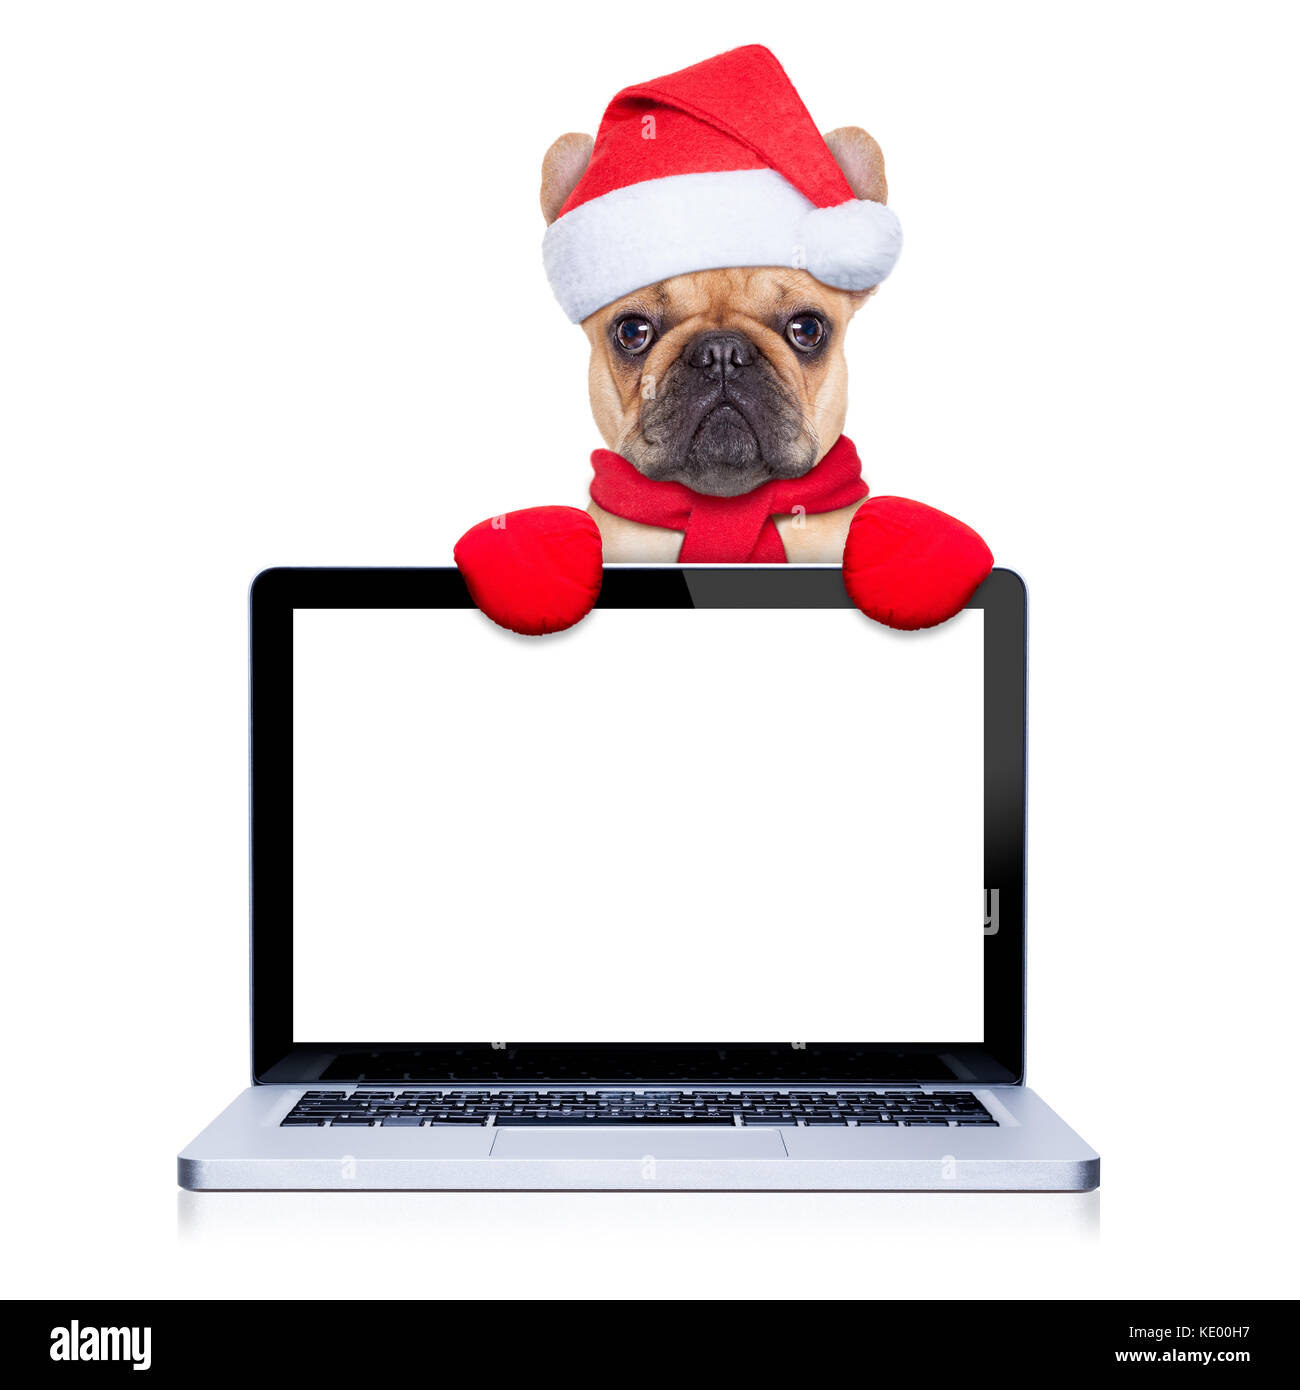 Isolated on White Background KwikMedia Poster of Fawn French Bulldog Dog Behind a Laptop pc Computer Screen